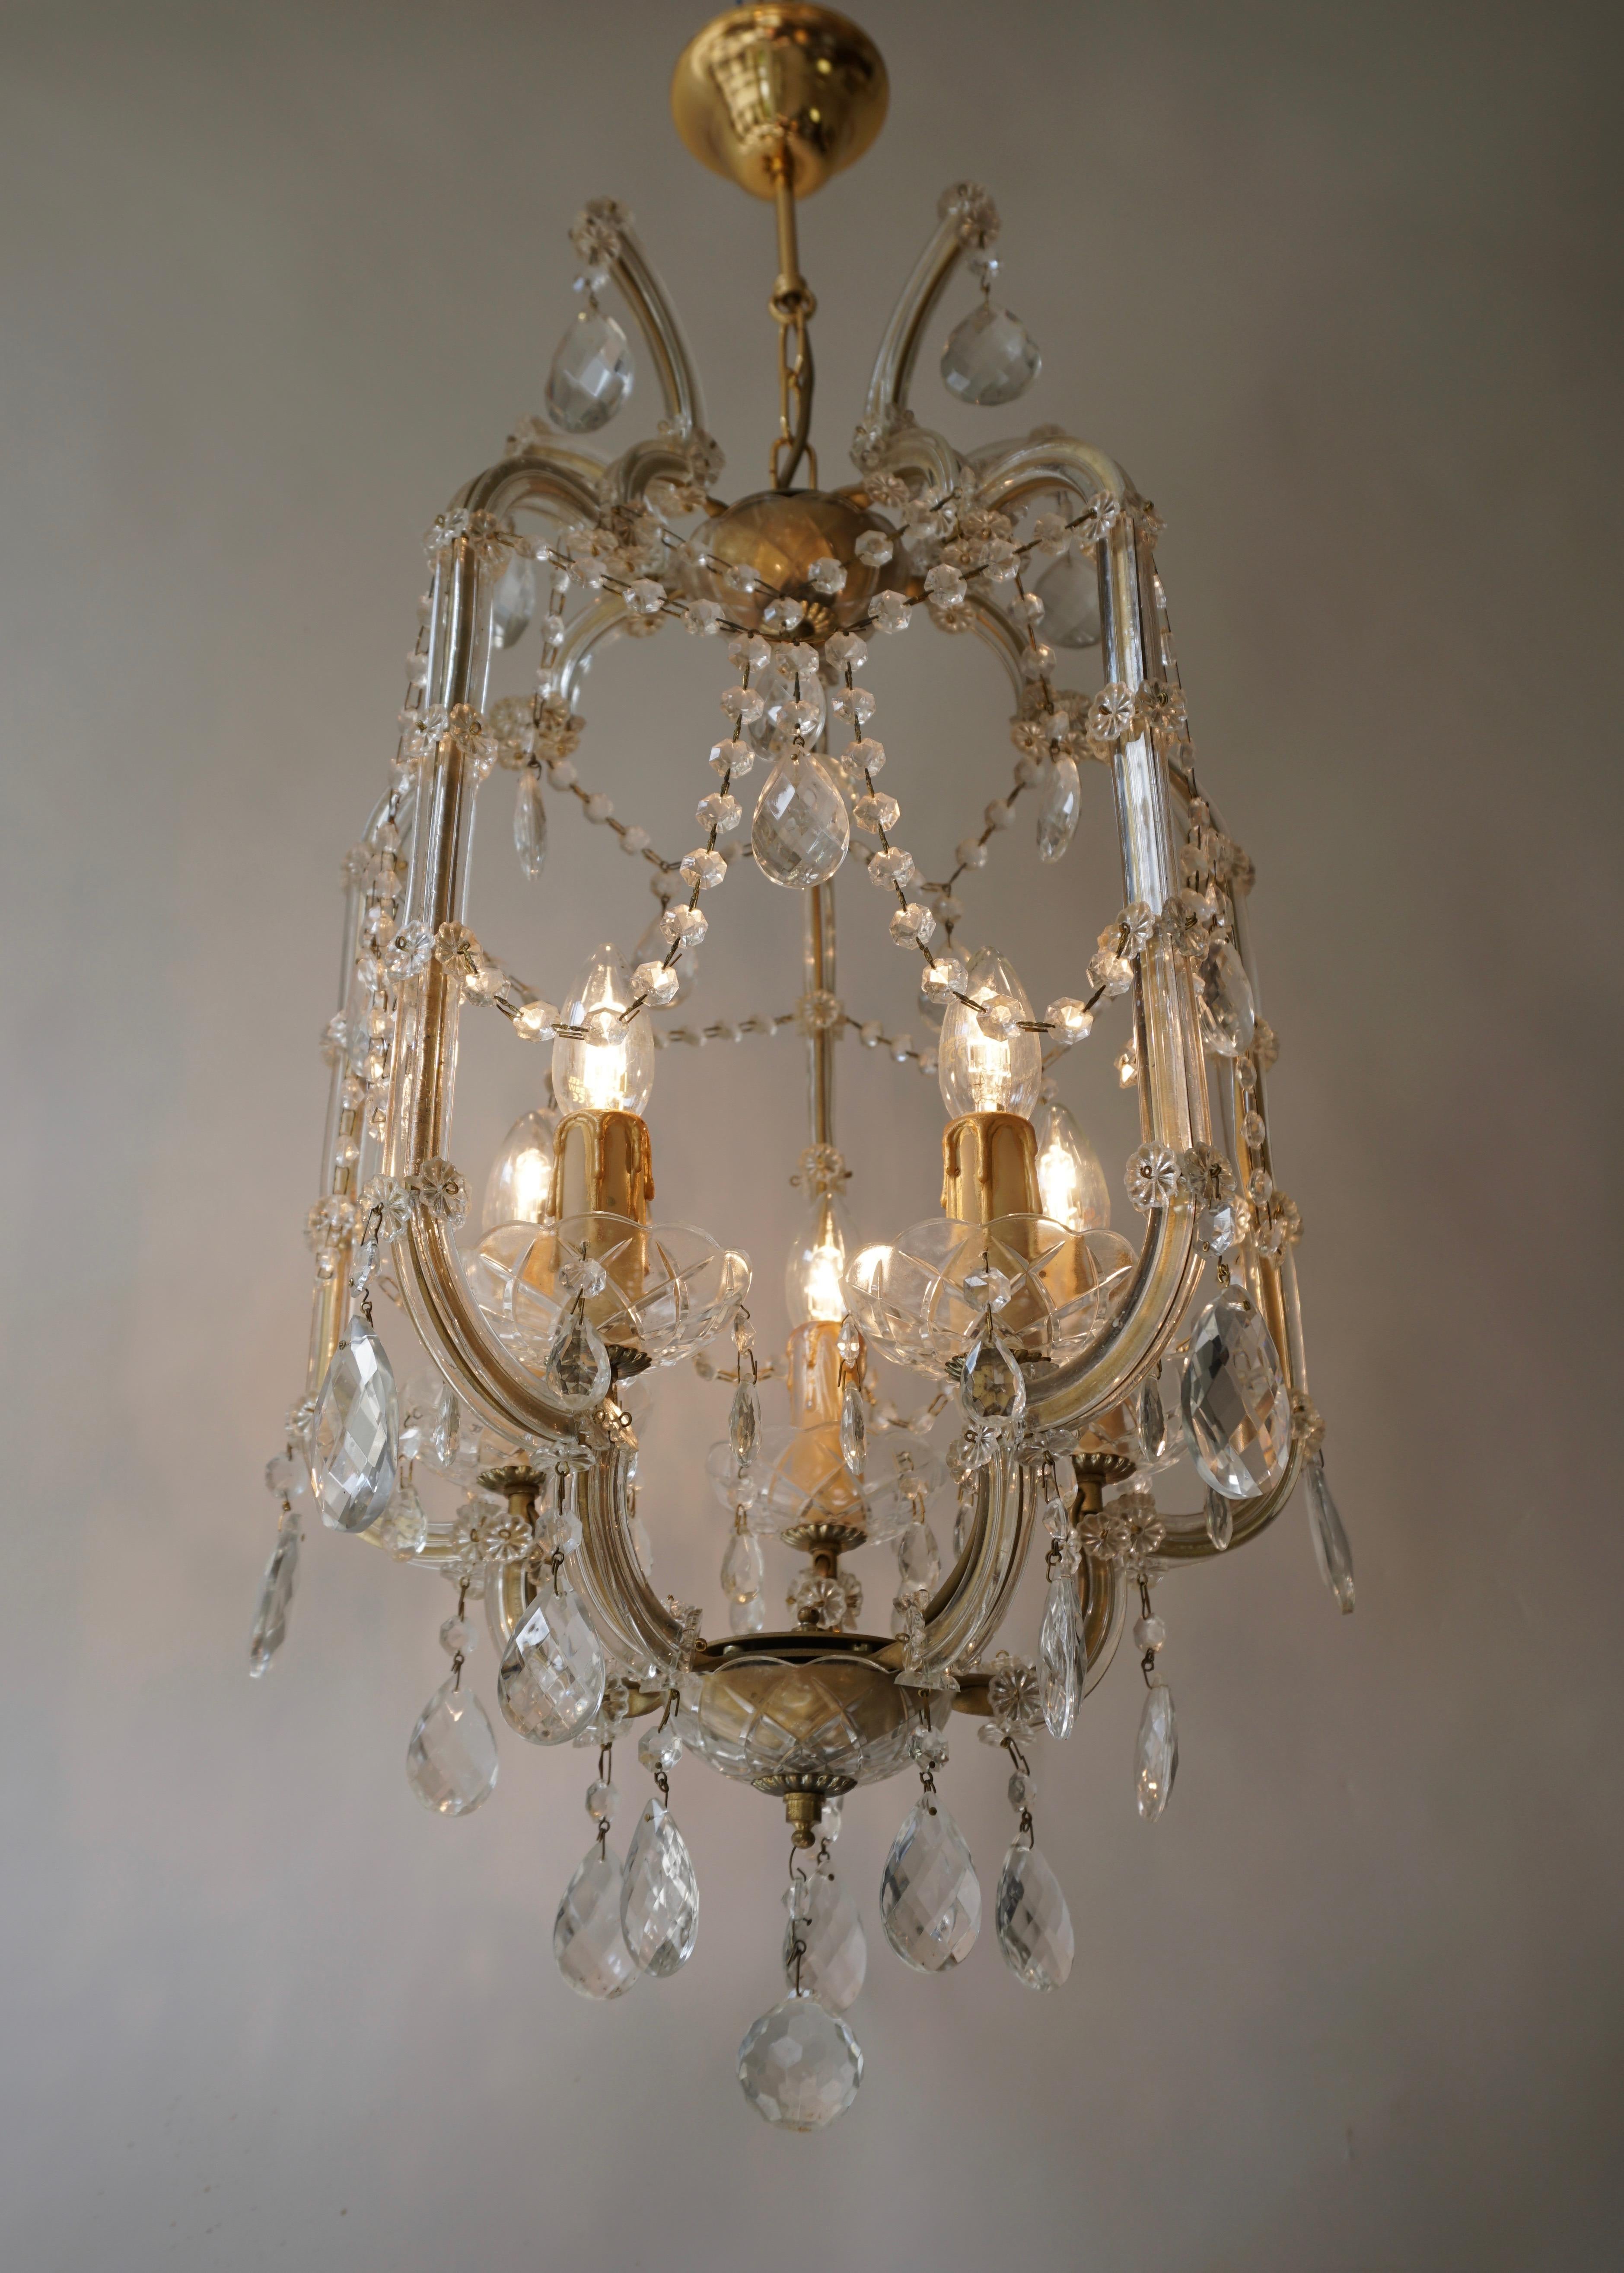 French chandelier in glass and brass with five E14 bulbs.
Diameter 40 cm.
Height fixture 70 cm.
Total height 95 cm.